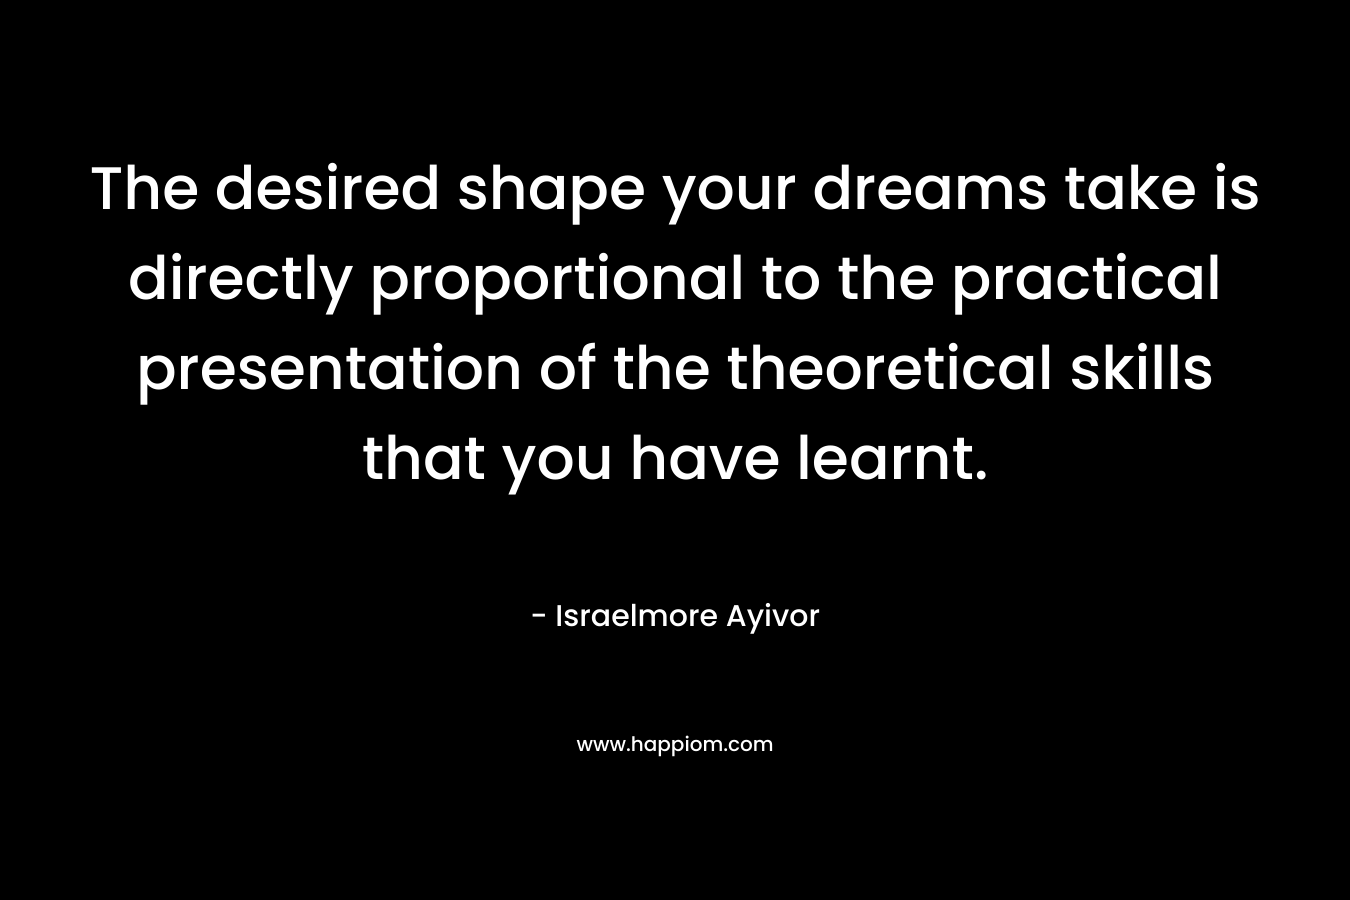 The desired shape your dreams take is directly proportional to the practical presentation of the theoretical skills that you have learnt. – Israelmore Ayivor